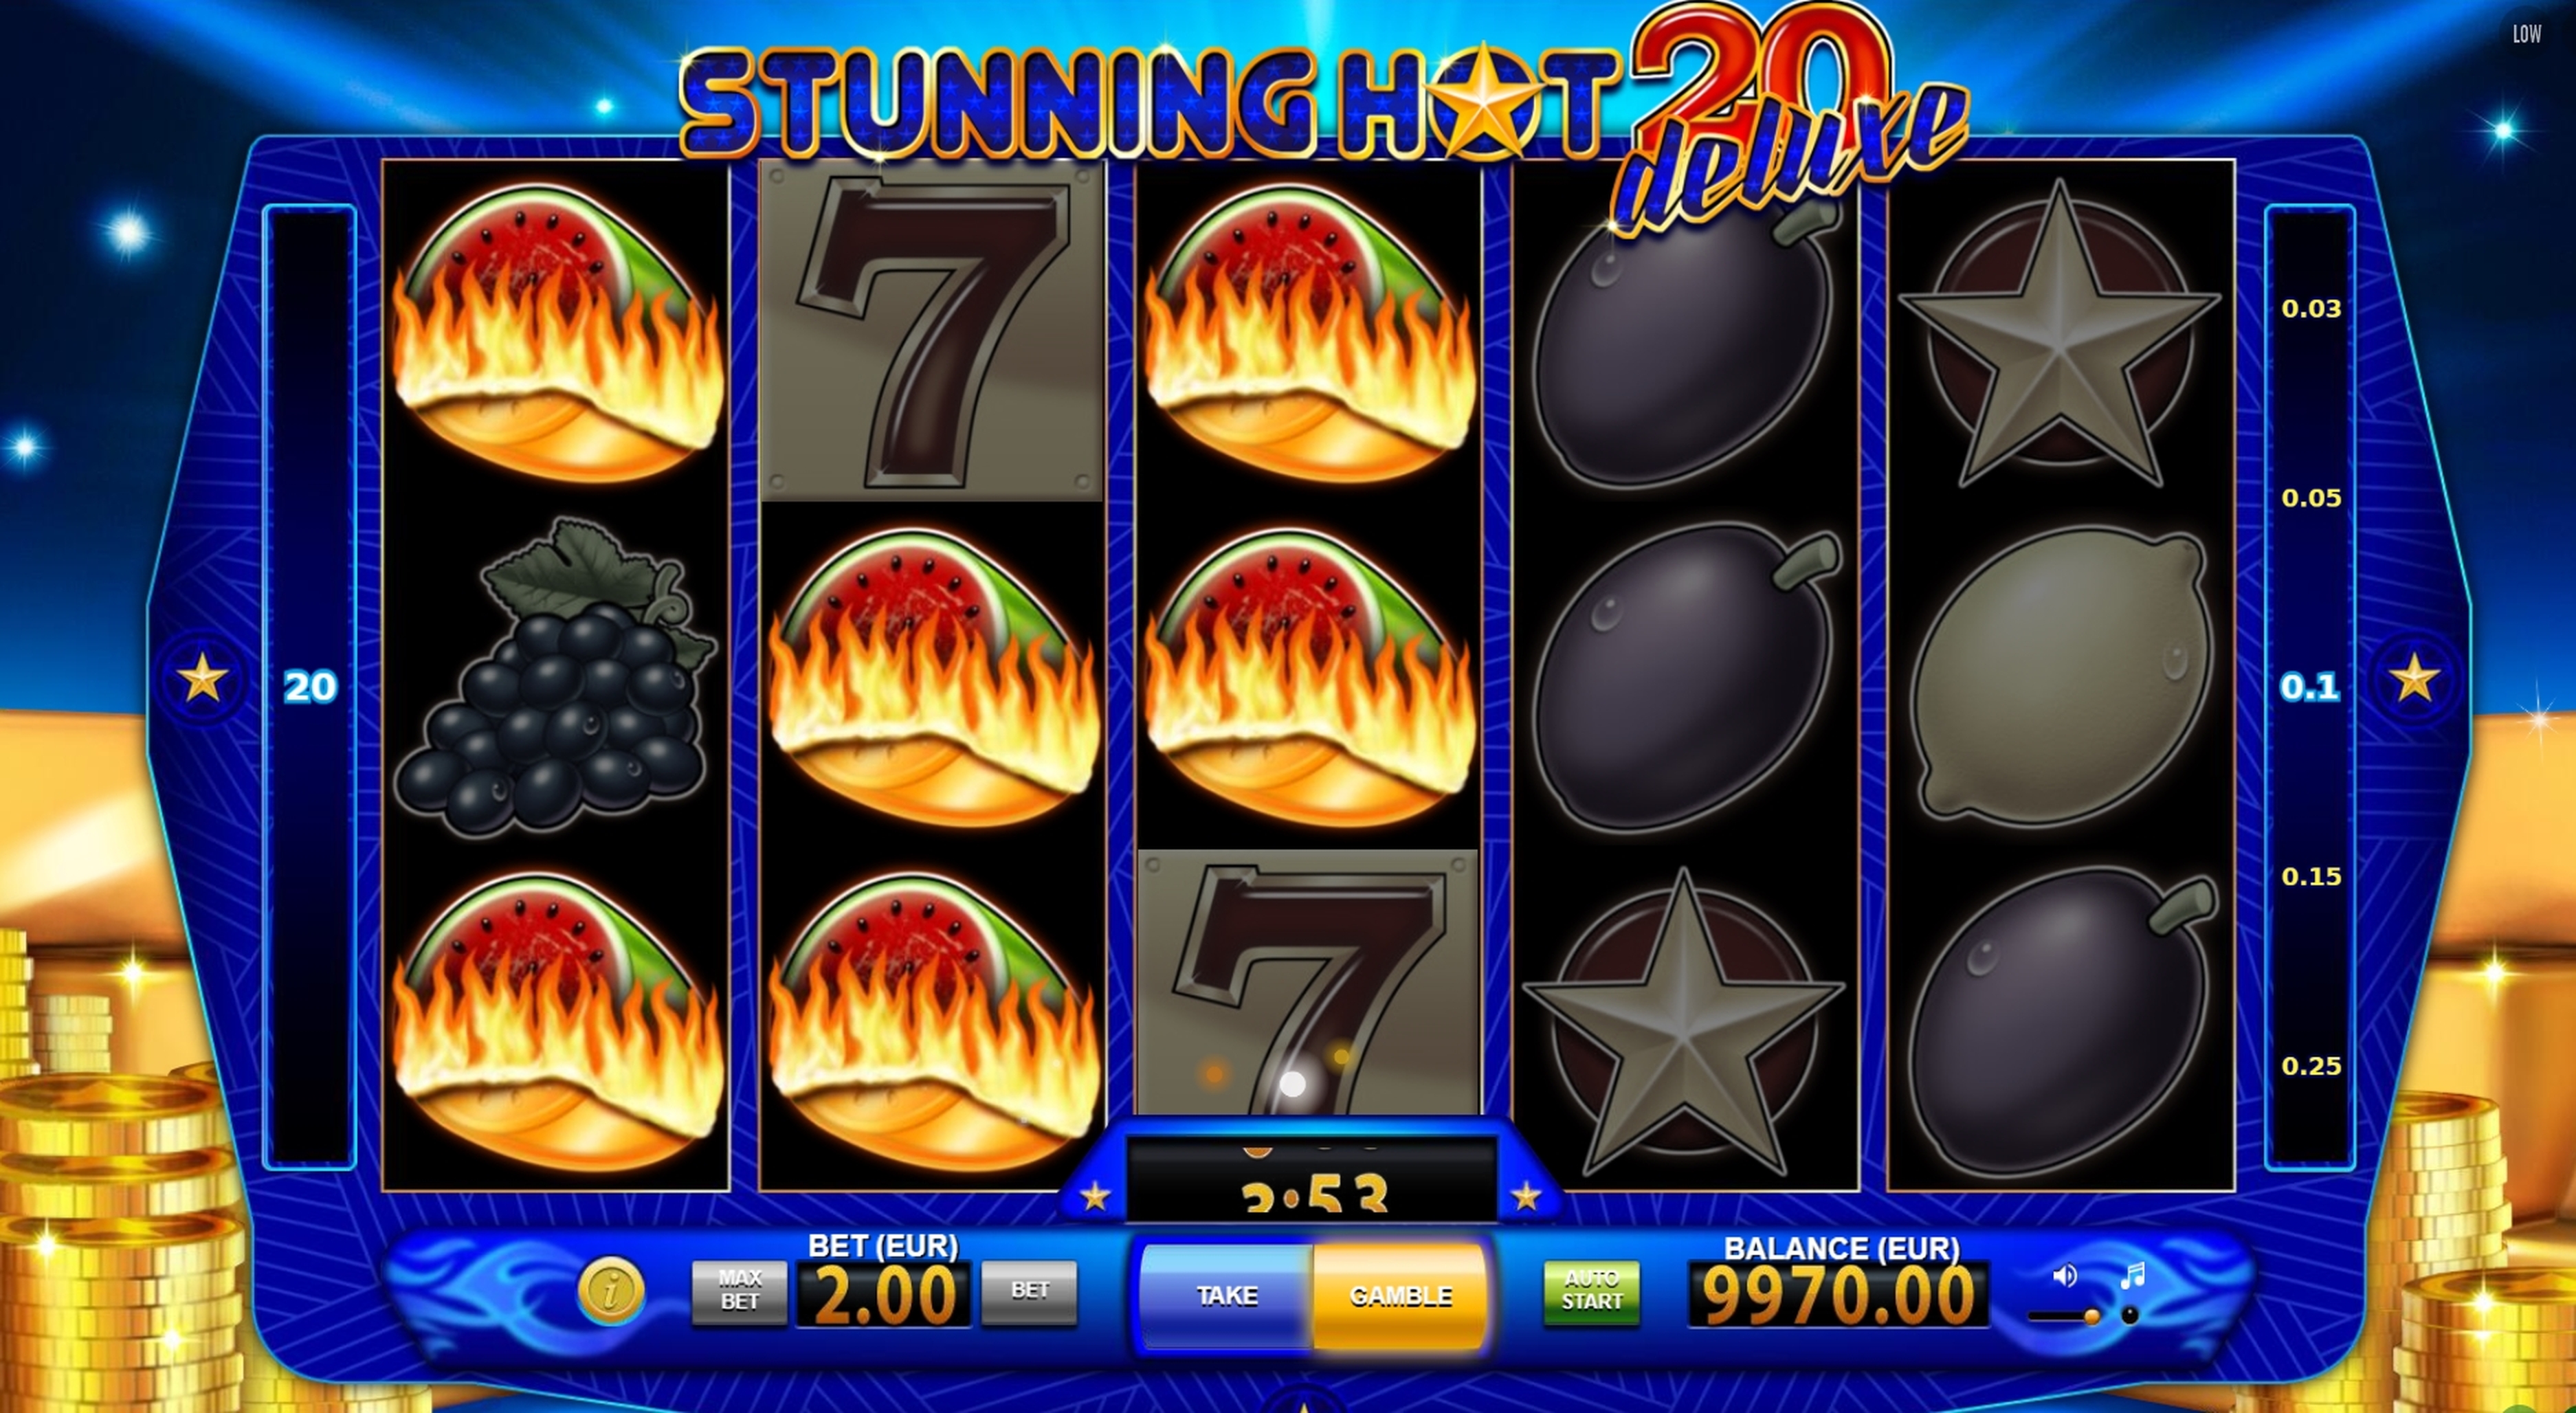 Win Money in Stunning Hot 20 Deluxe Free Slot Game by BF Games